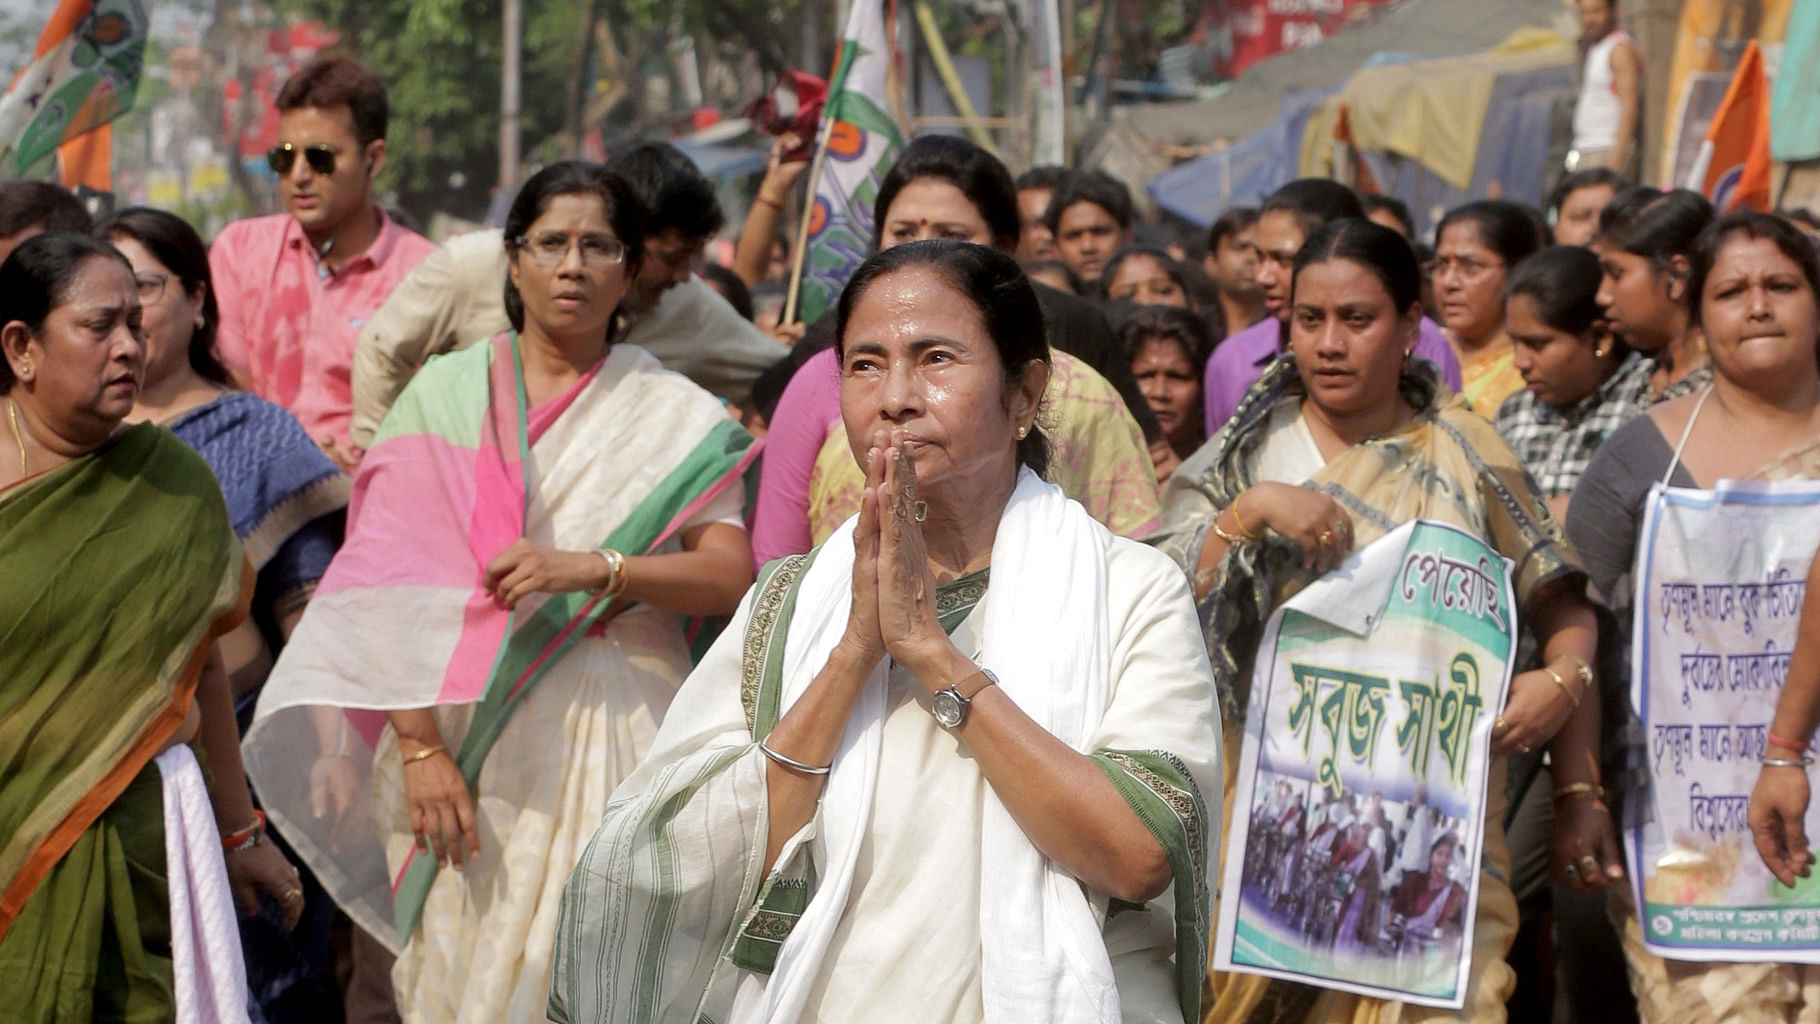 

West Bengal Chief Minister Mamata Banerjee leads a march from Shyambazar to Dharamtala on International Women’s Day in Kolkata, on March 8, 2016. (Photo: IANS)